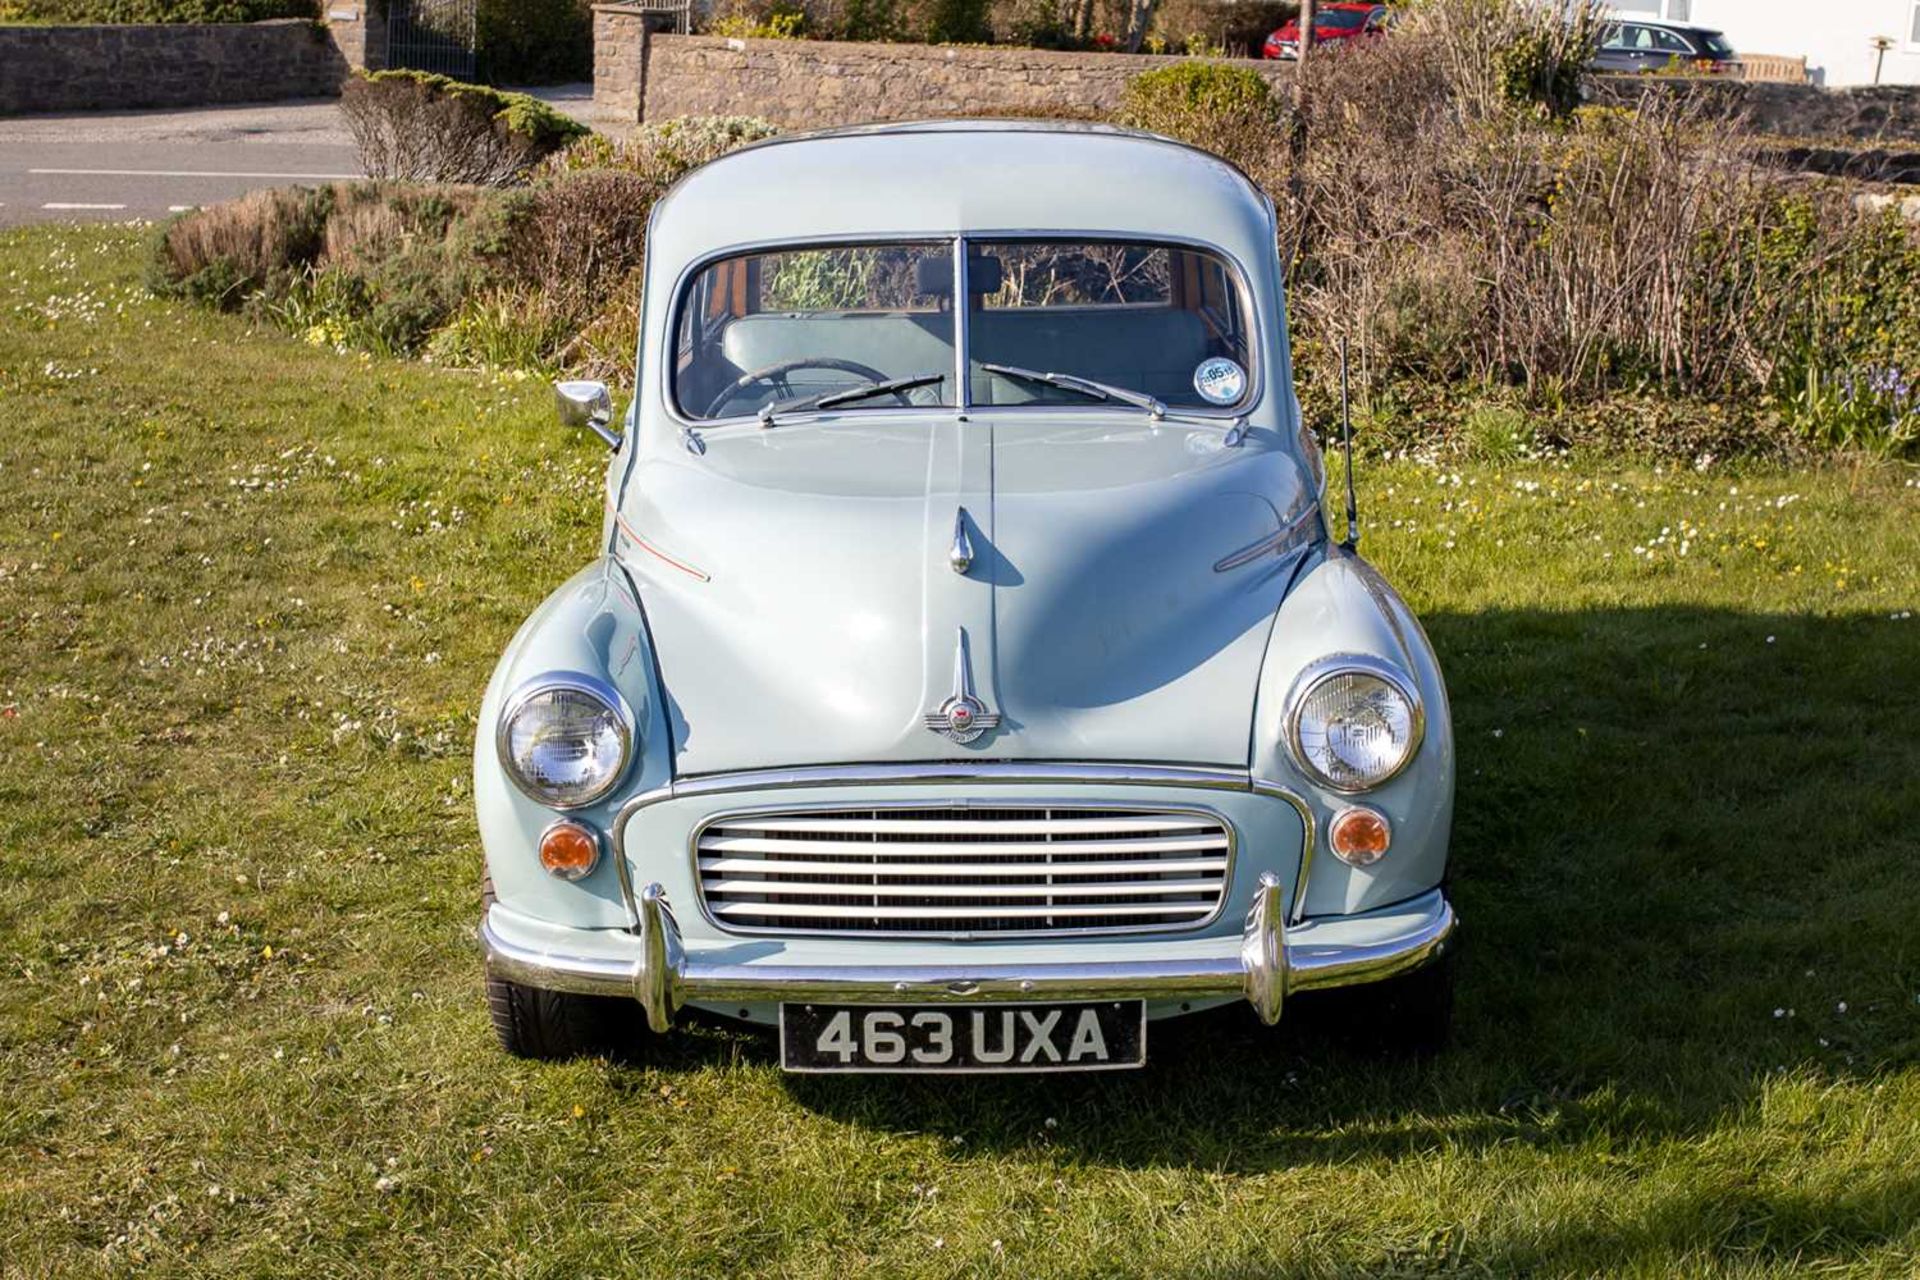 1956 Morris Minor Traveller Uprated with 1275cc engine  - Image 24 of 89